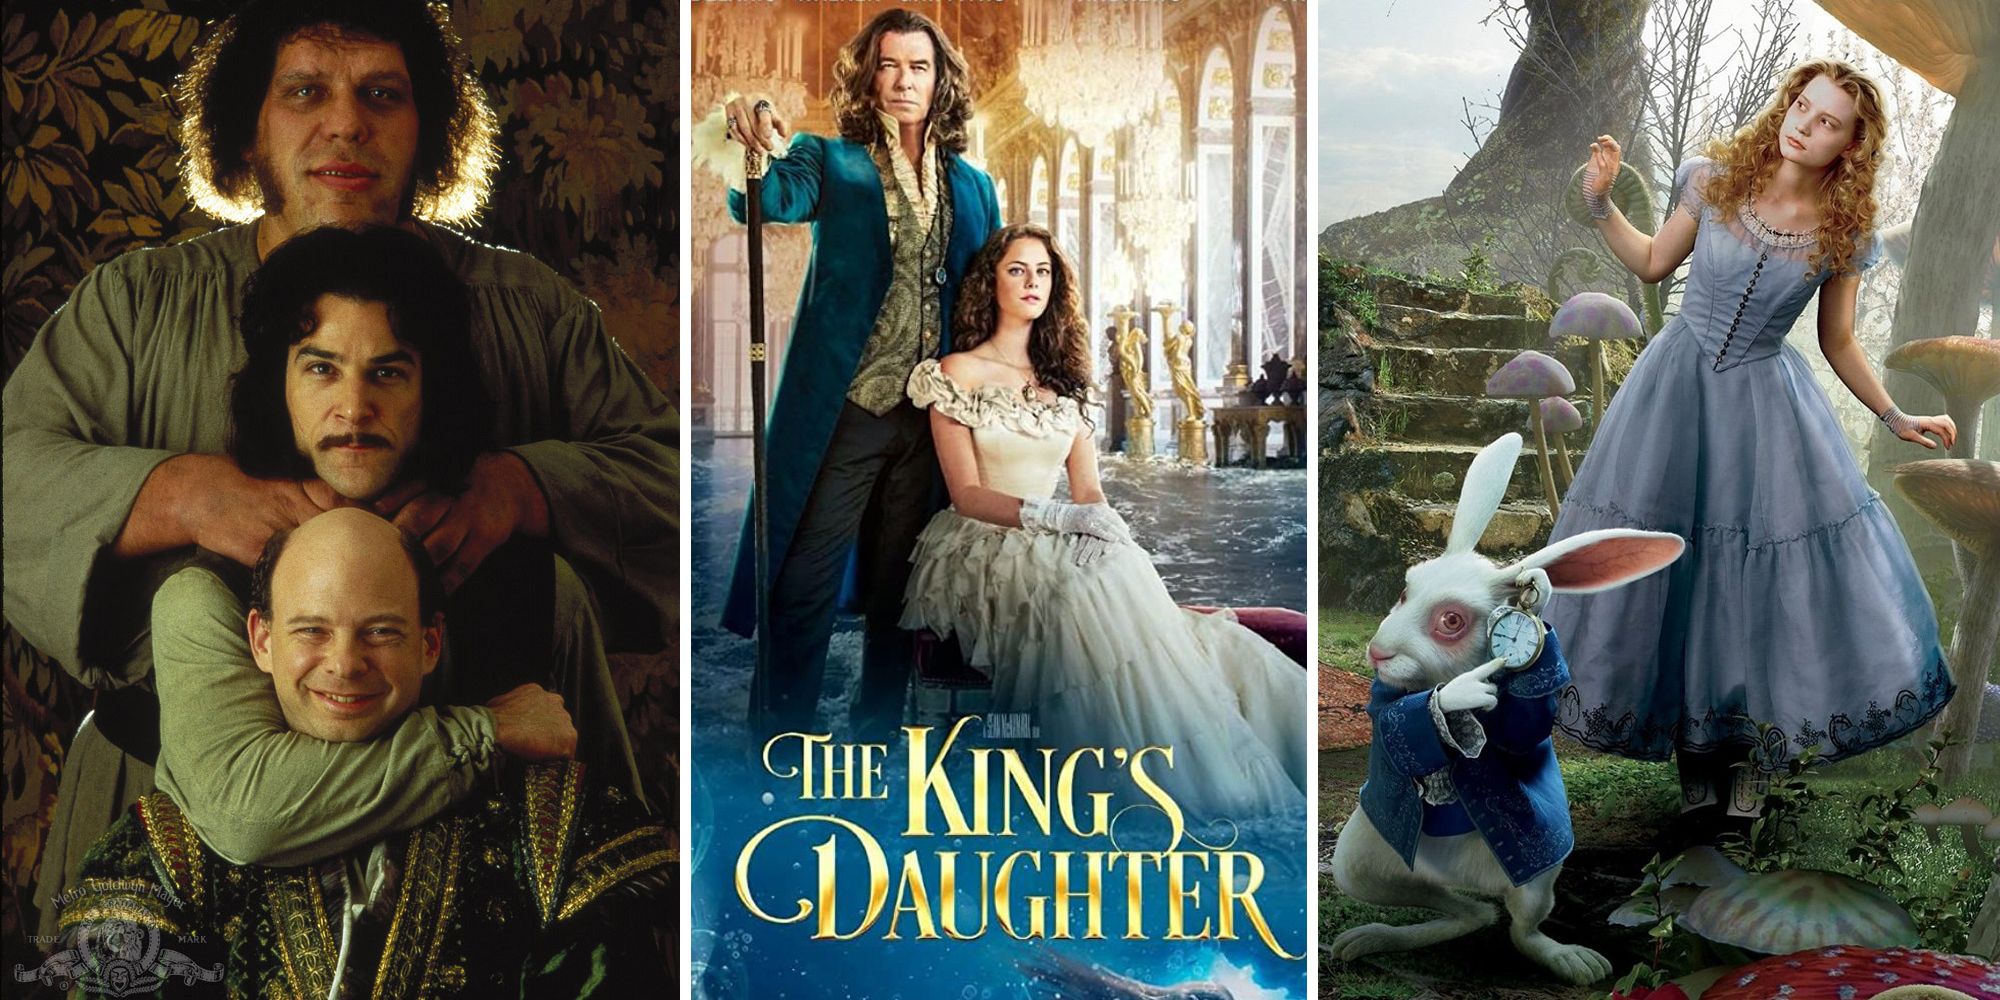 Split image from The Princess Bride, The King's Daughter, and Alice in Wonderland